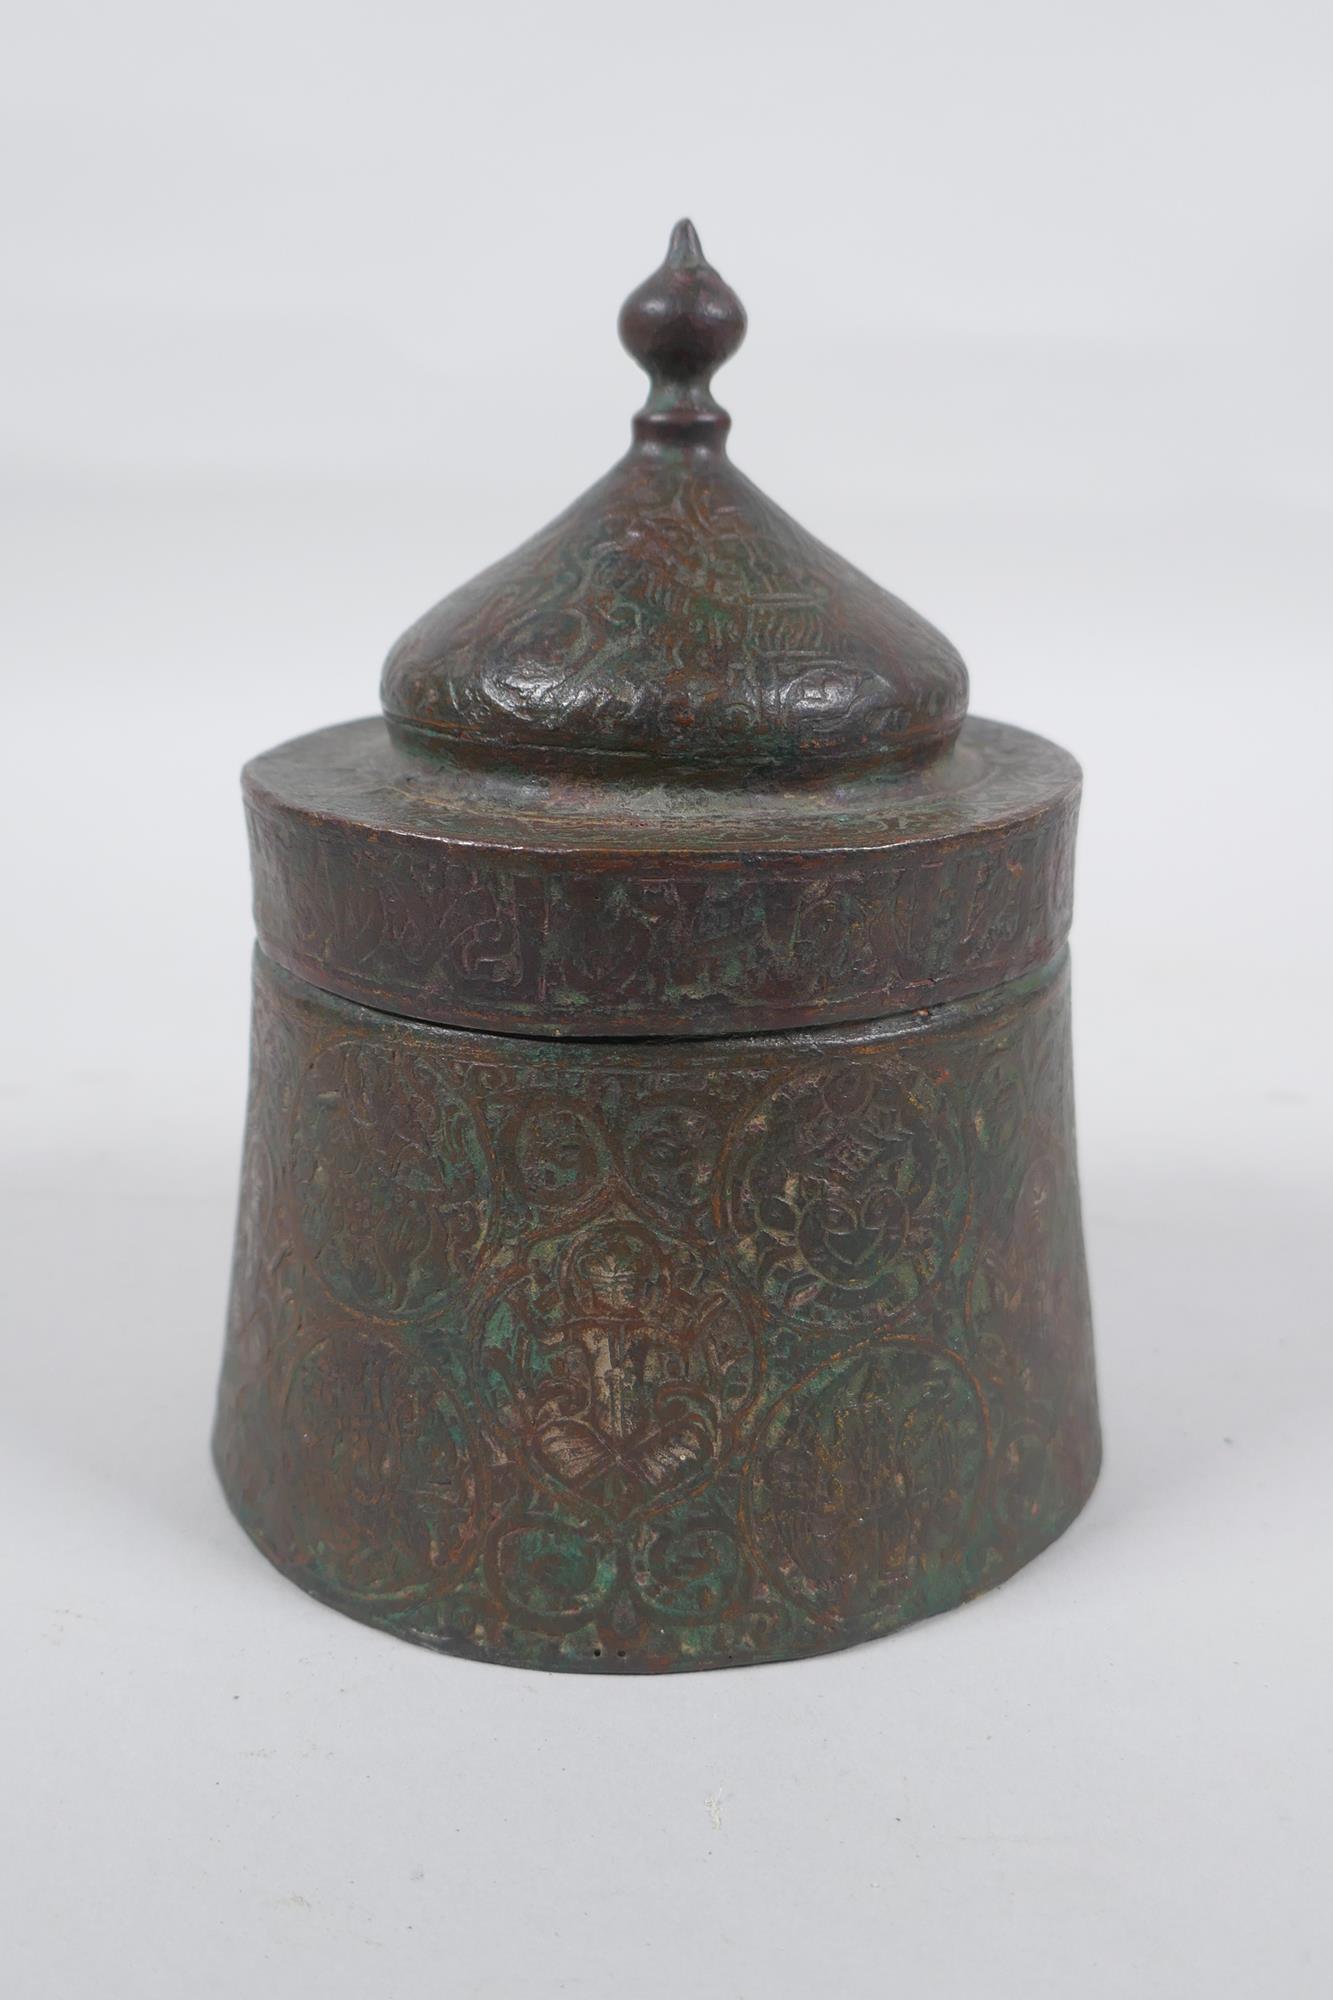 An antique Persian copper ink well with remnants of multi metal inlaid decoration, possibly